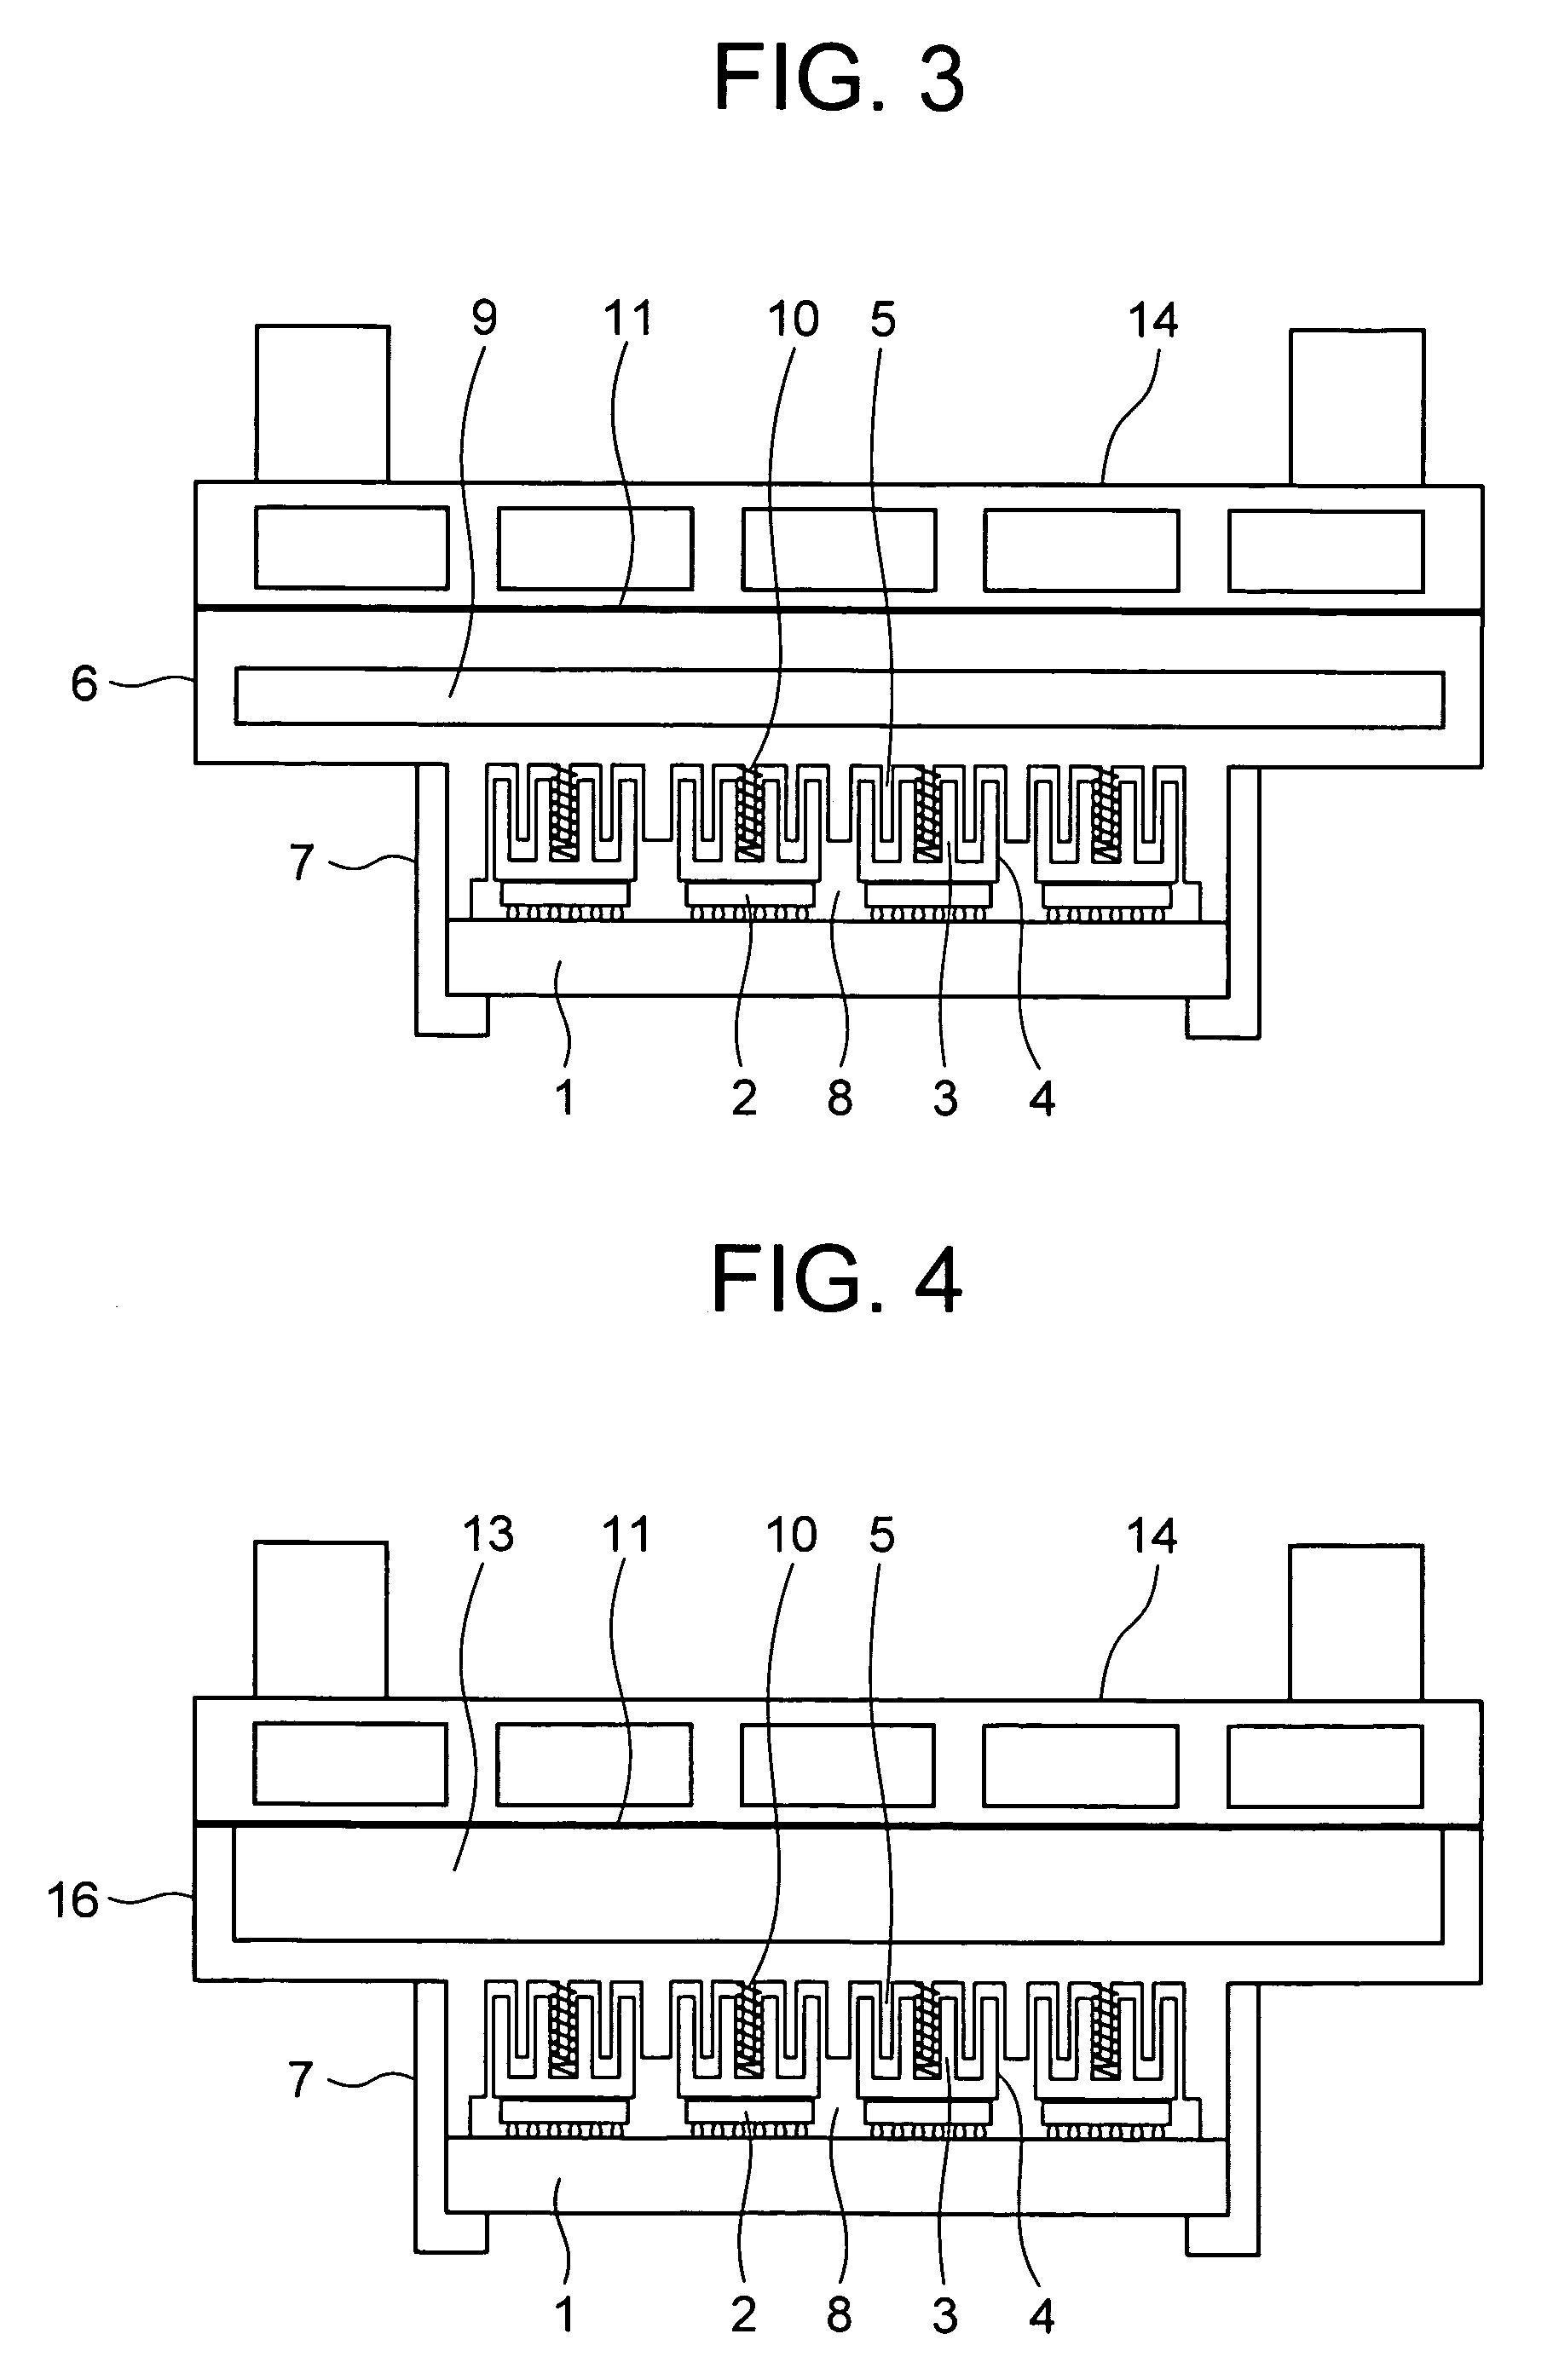 Cooling apparatus for electronic device